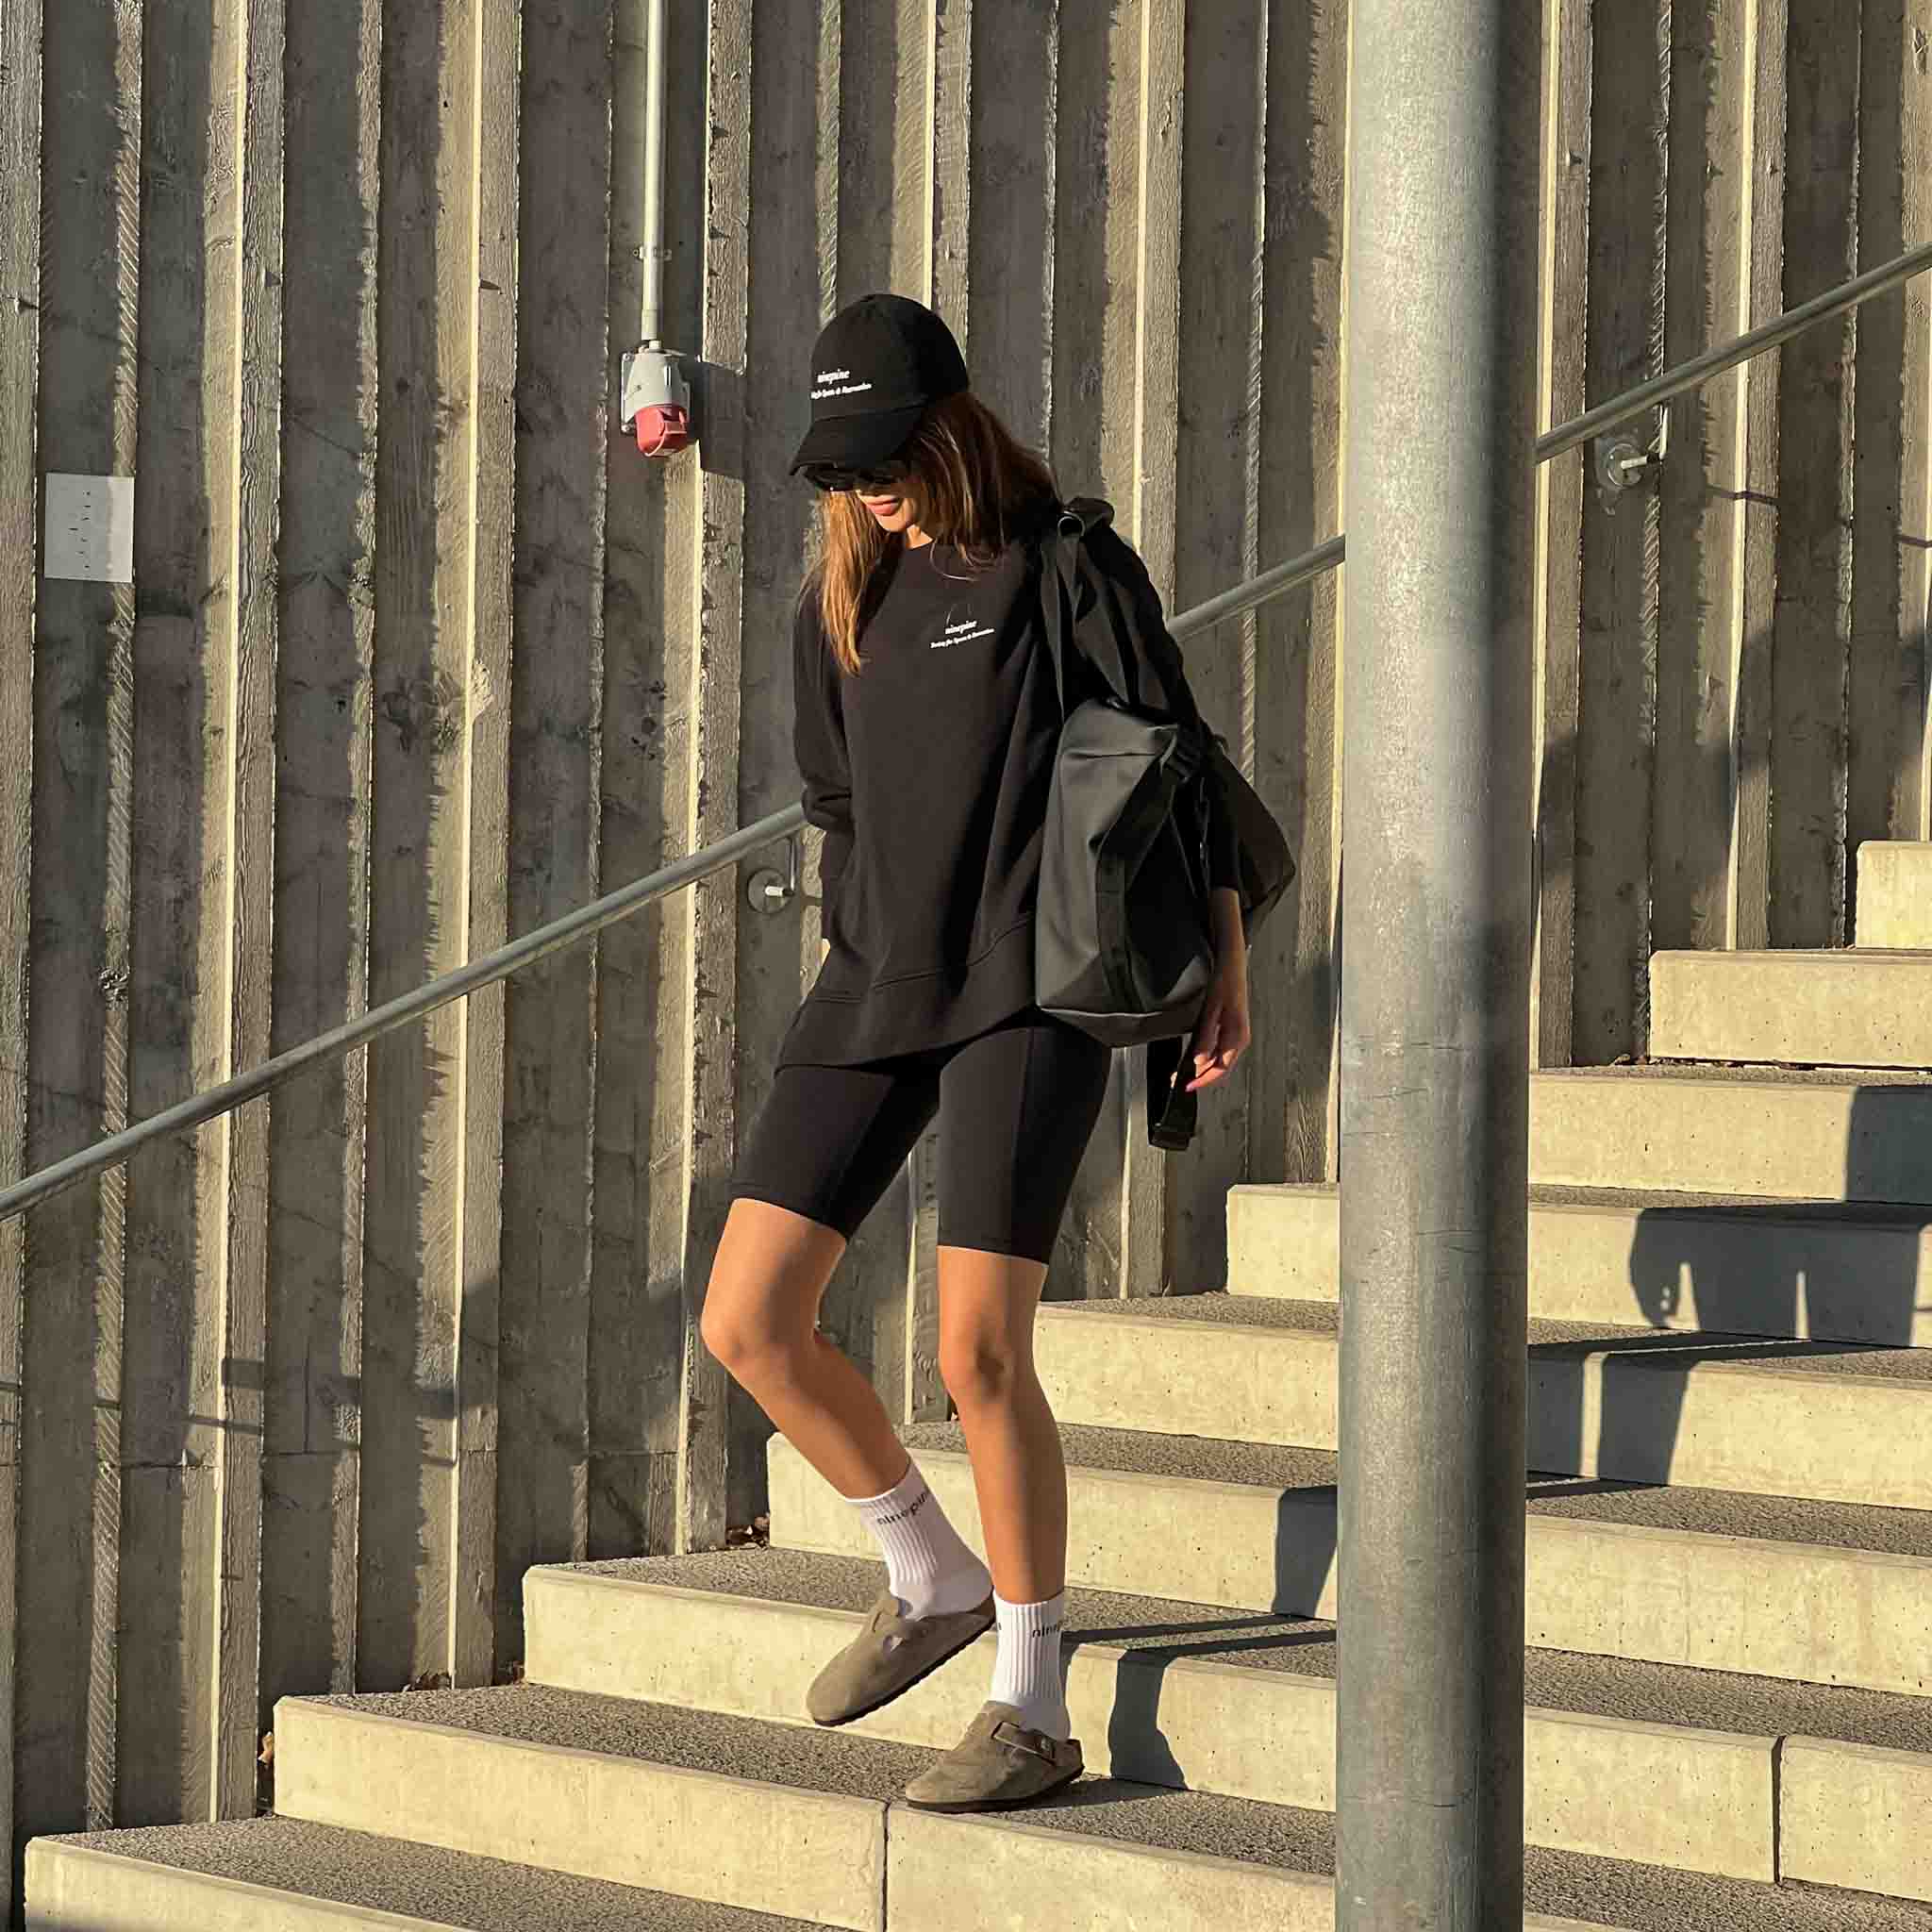 Woman in a black ninepine cap, sweater, biker shorts and sandles walking down concrete steps wiith sunglasses on and a gym bag on her left shoulder